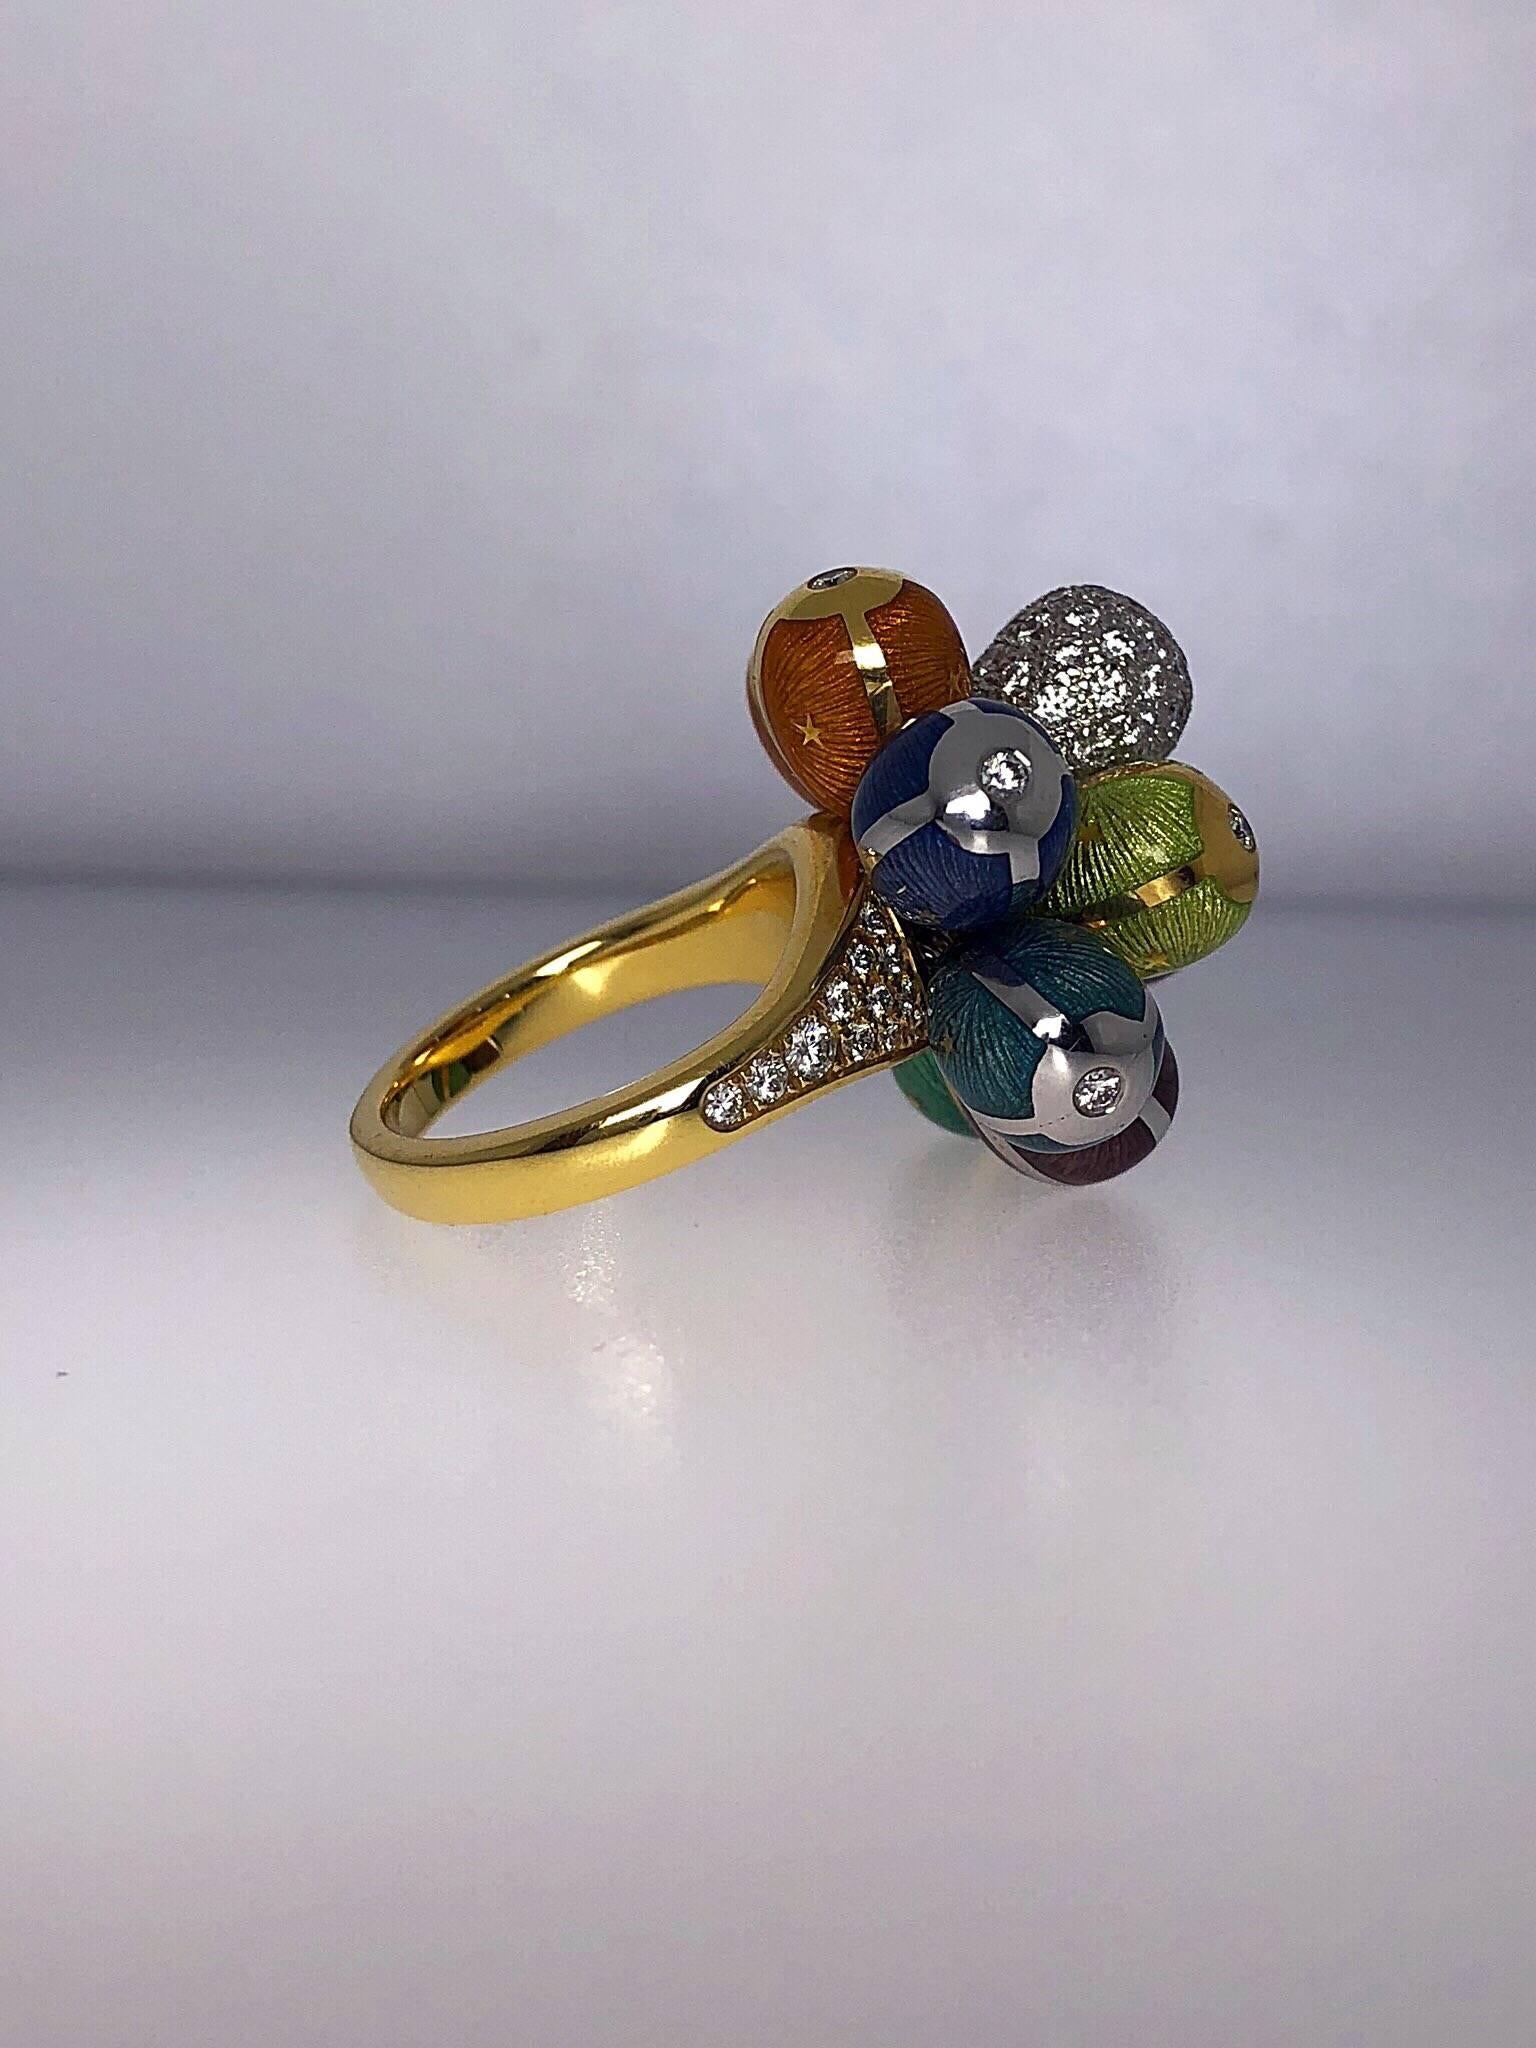 This stunning Modern Victor Mayer Faberge Ring is composed of a cluster of 9 Multi-Colored guilloché  enamel eggs and one diamond egg, set in both 18 karat white and yellow gold. Each enamel egg is accented with one round brilliant diamond in the